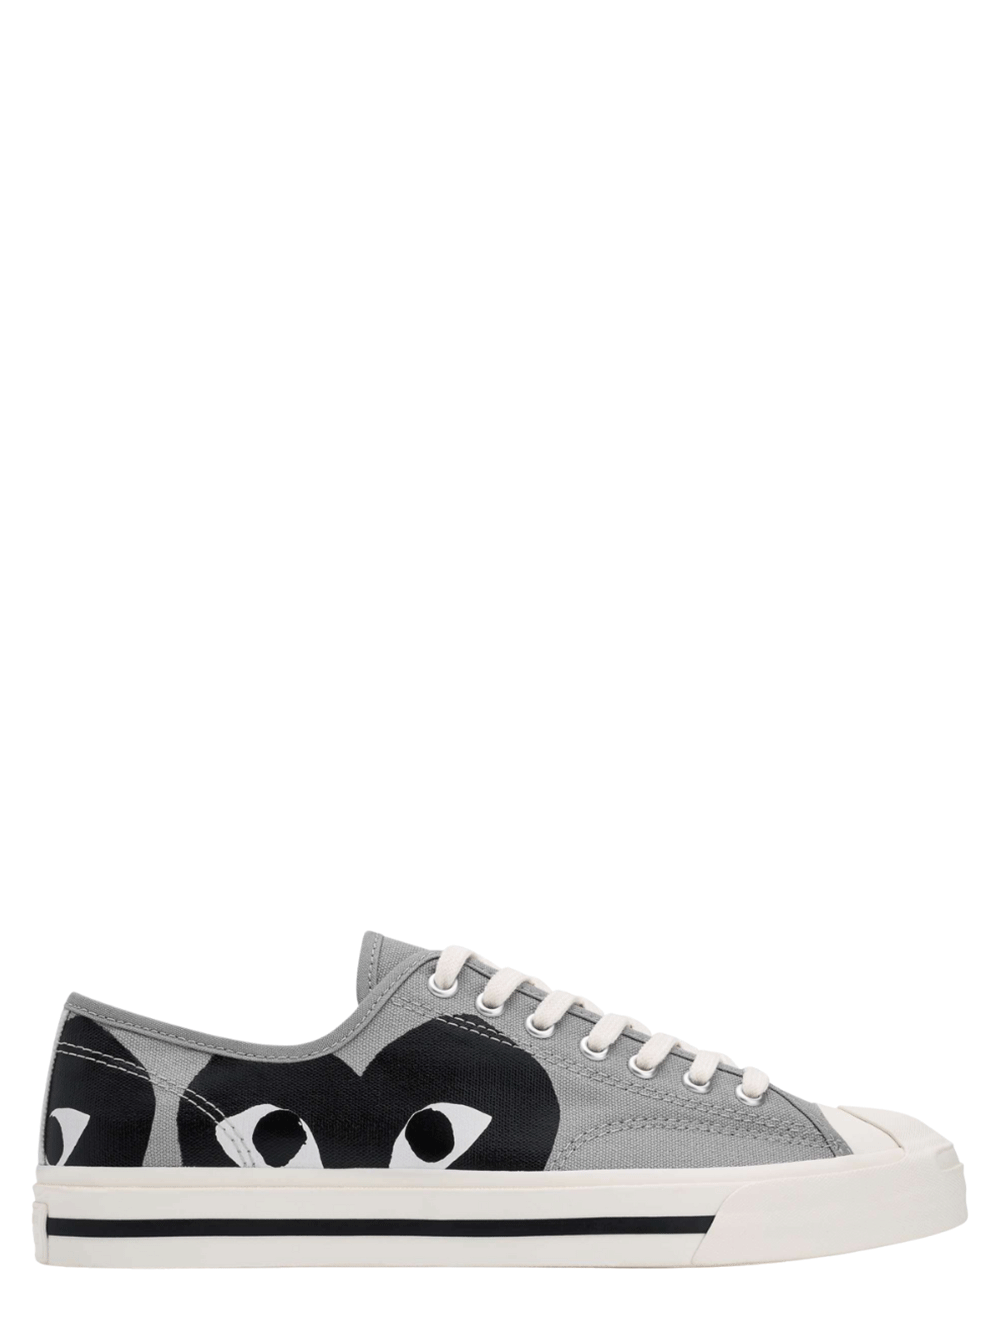 COMME-des-GARCONS-PLAY-CONVERSE-PLAY-Converse-Jack-Purcell-Grey-Black-1